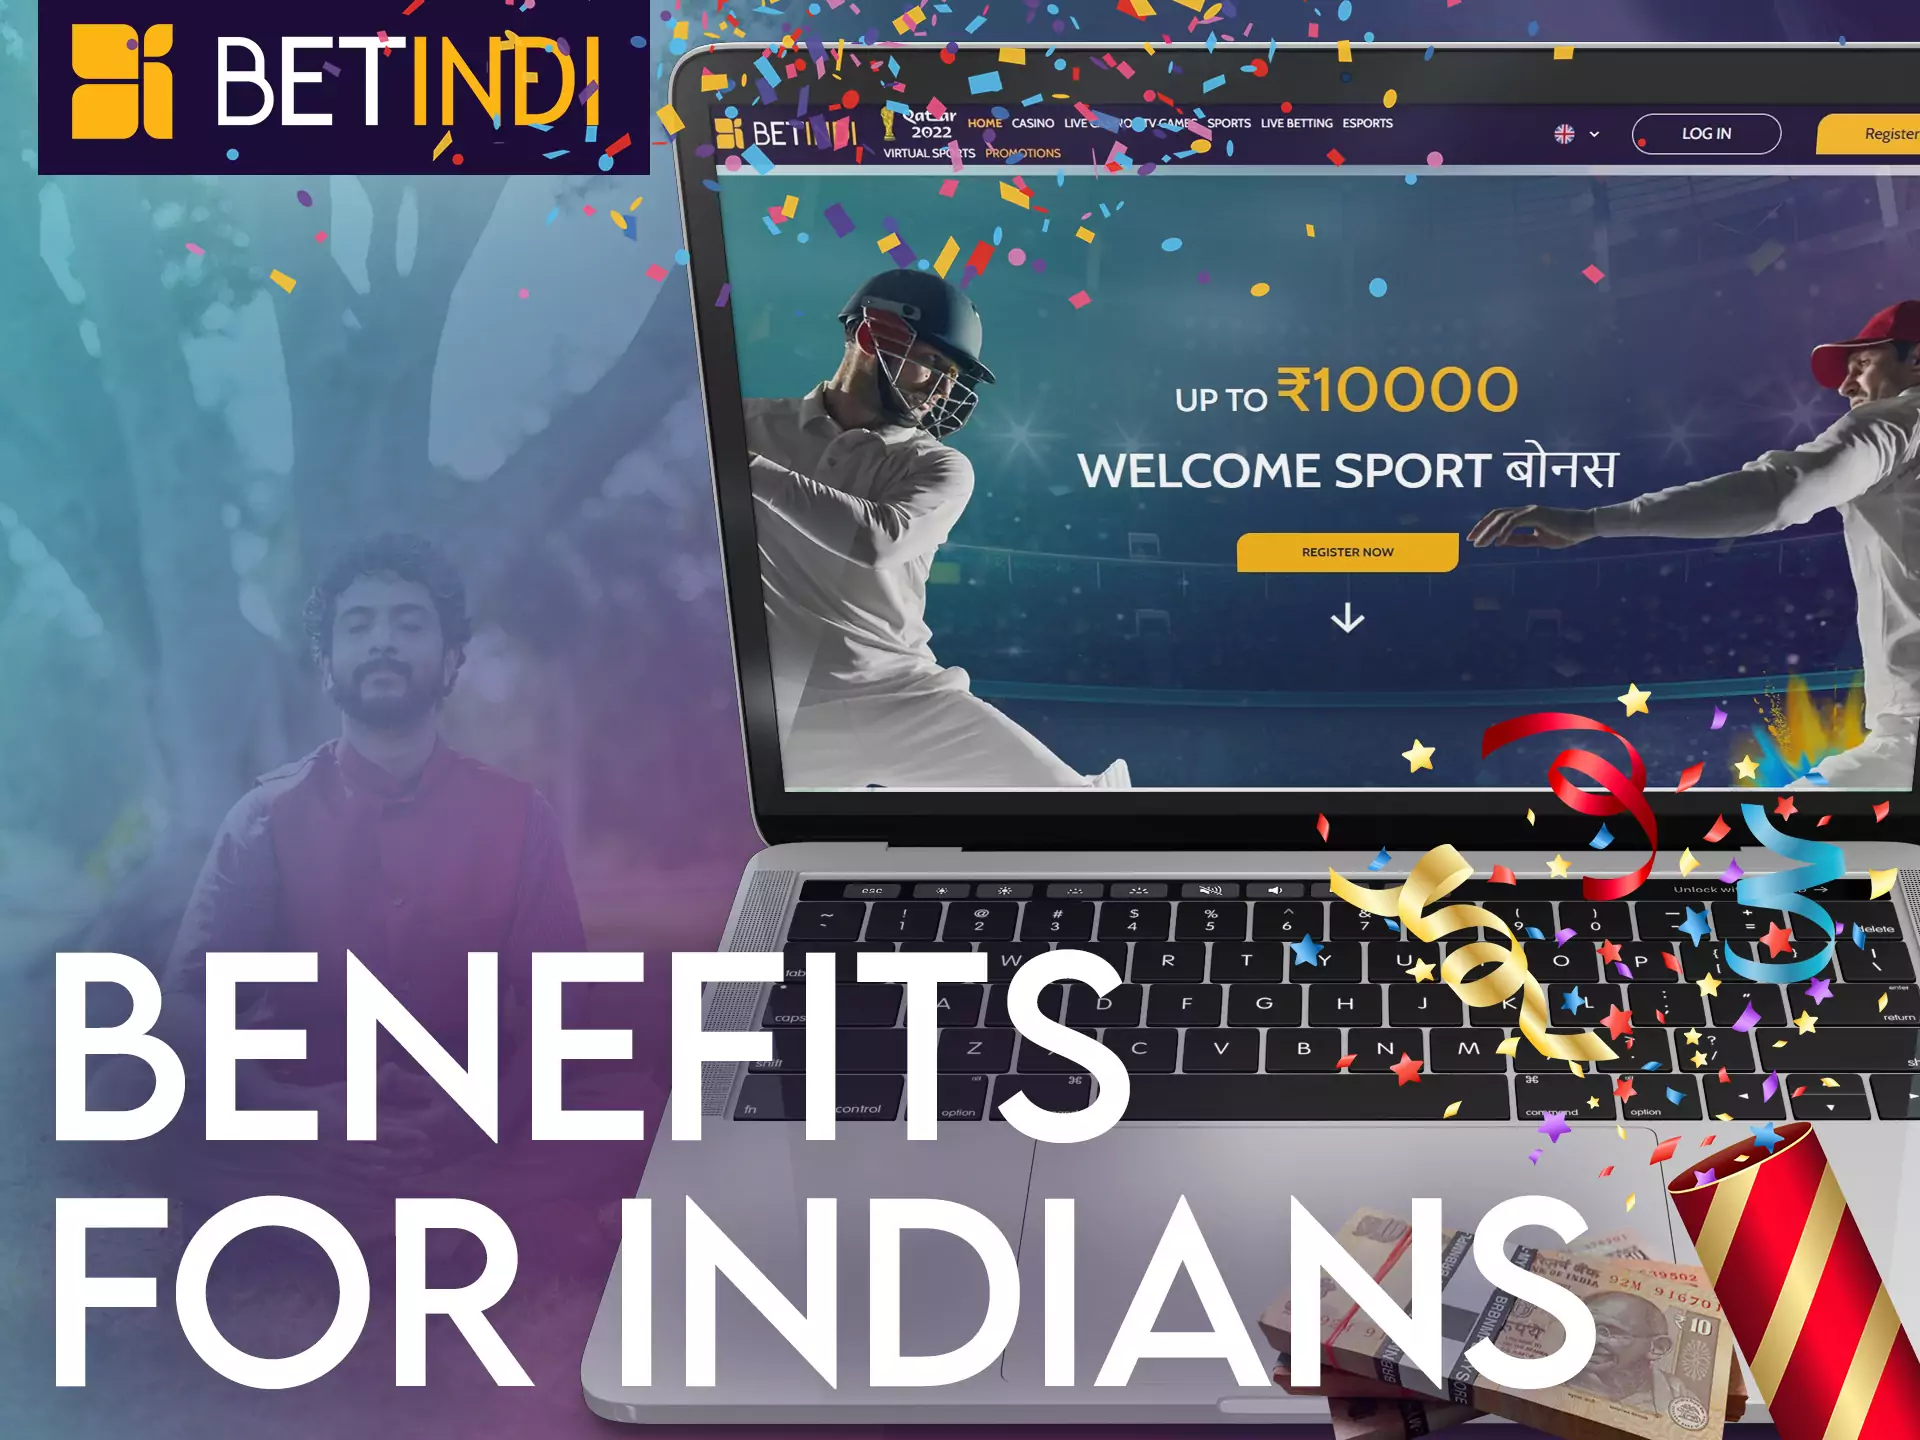 Betindi offers pleasant bonuses and convenient functionality for users from India.